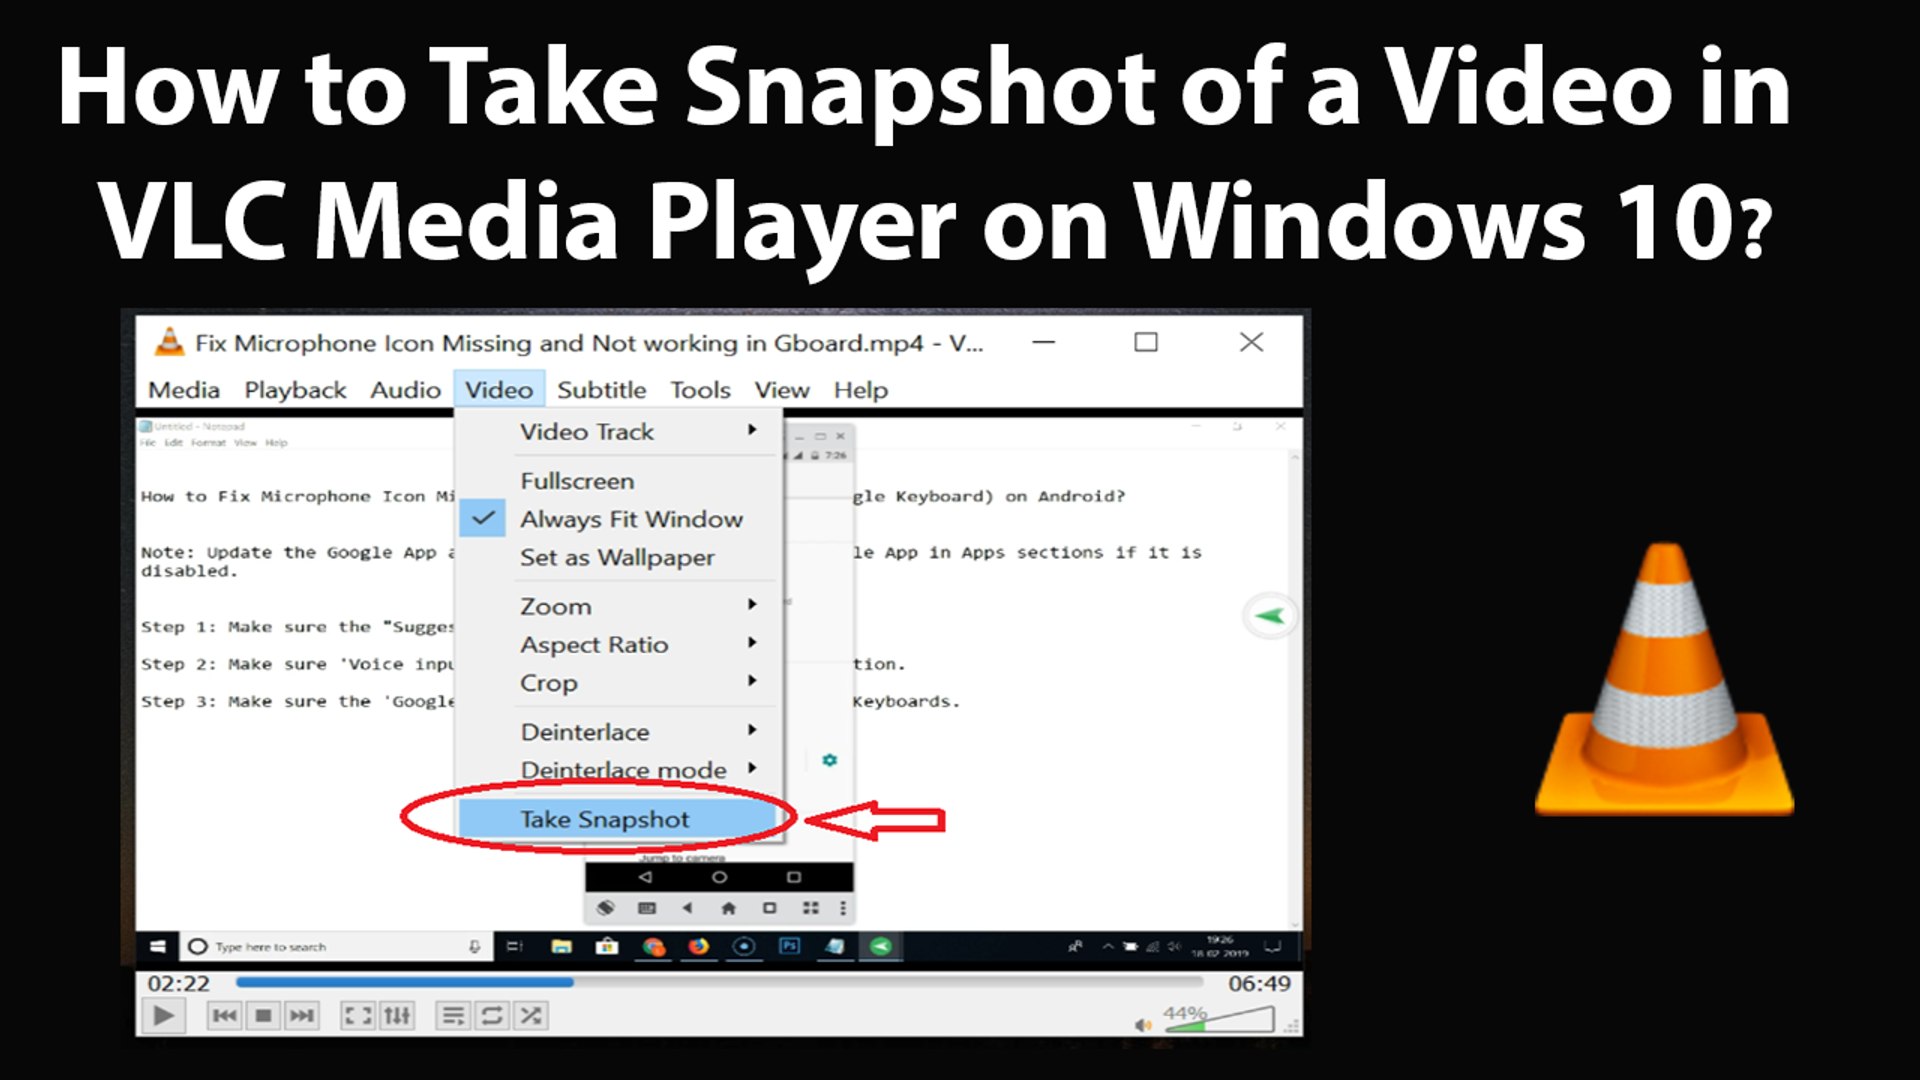 How to Take Snapshot of a Video in VLC Media Player on Windows 10? - video  Dailymotion